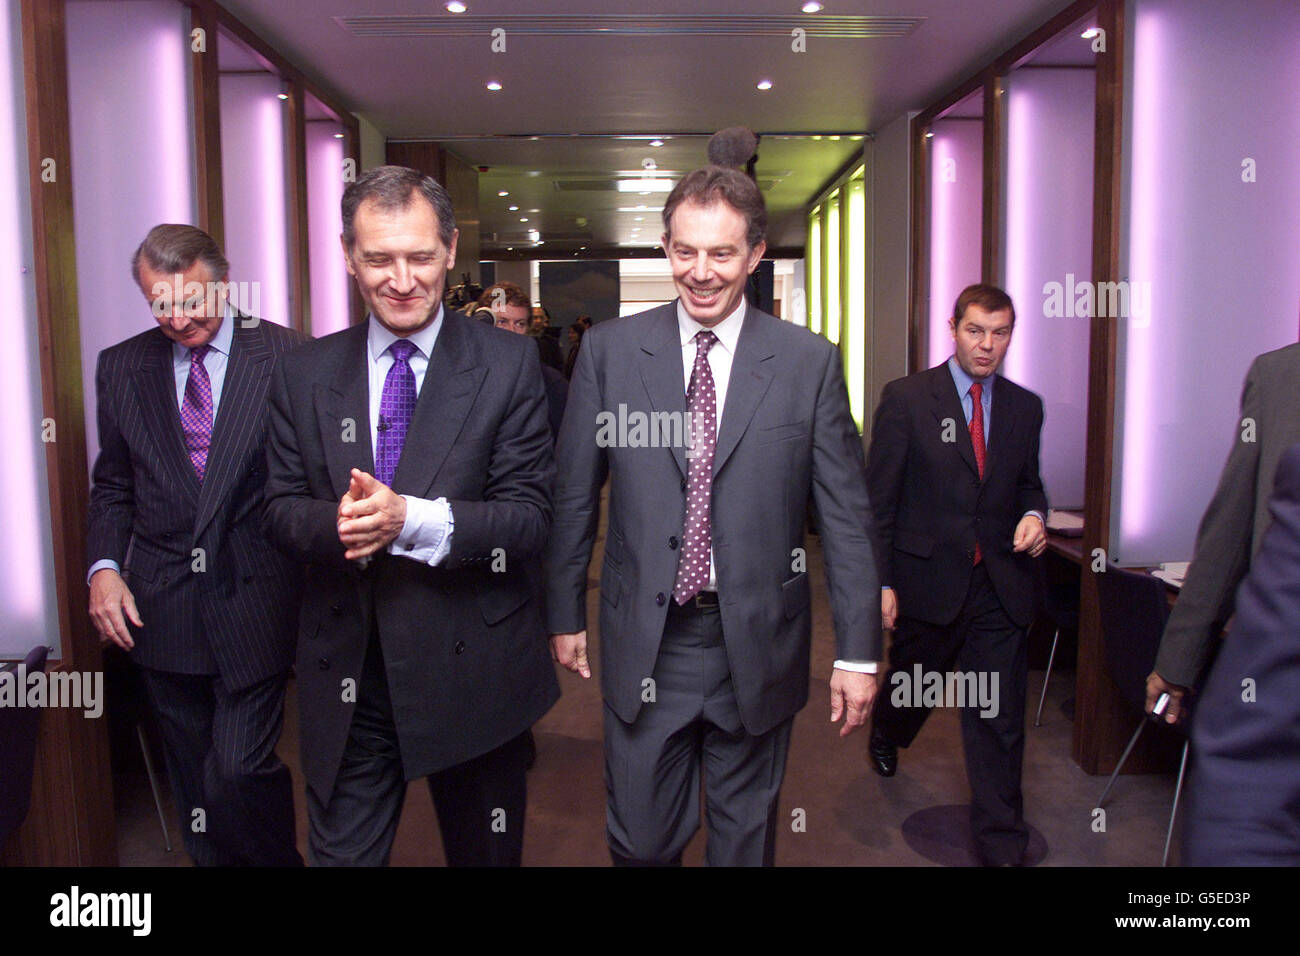 Prime Minister Tony Blair, walks with George Cox, Director General (L) of the IoD centre as Blair opened the Institute of Directors Building (IoD) centre at Pall Mall, central London. Stock Photo